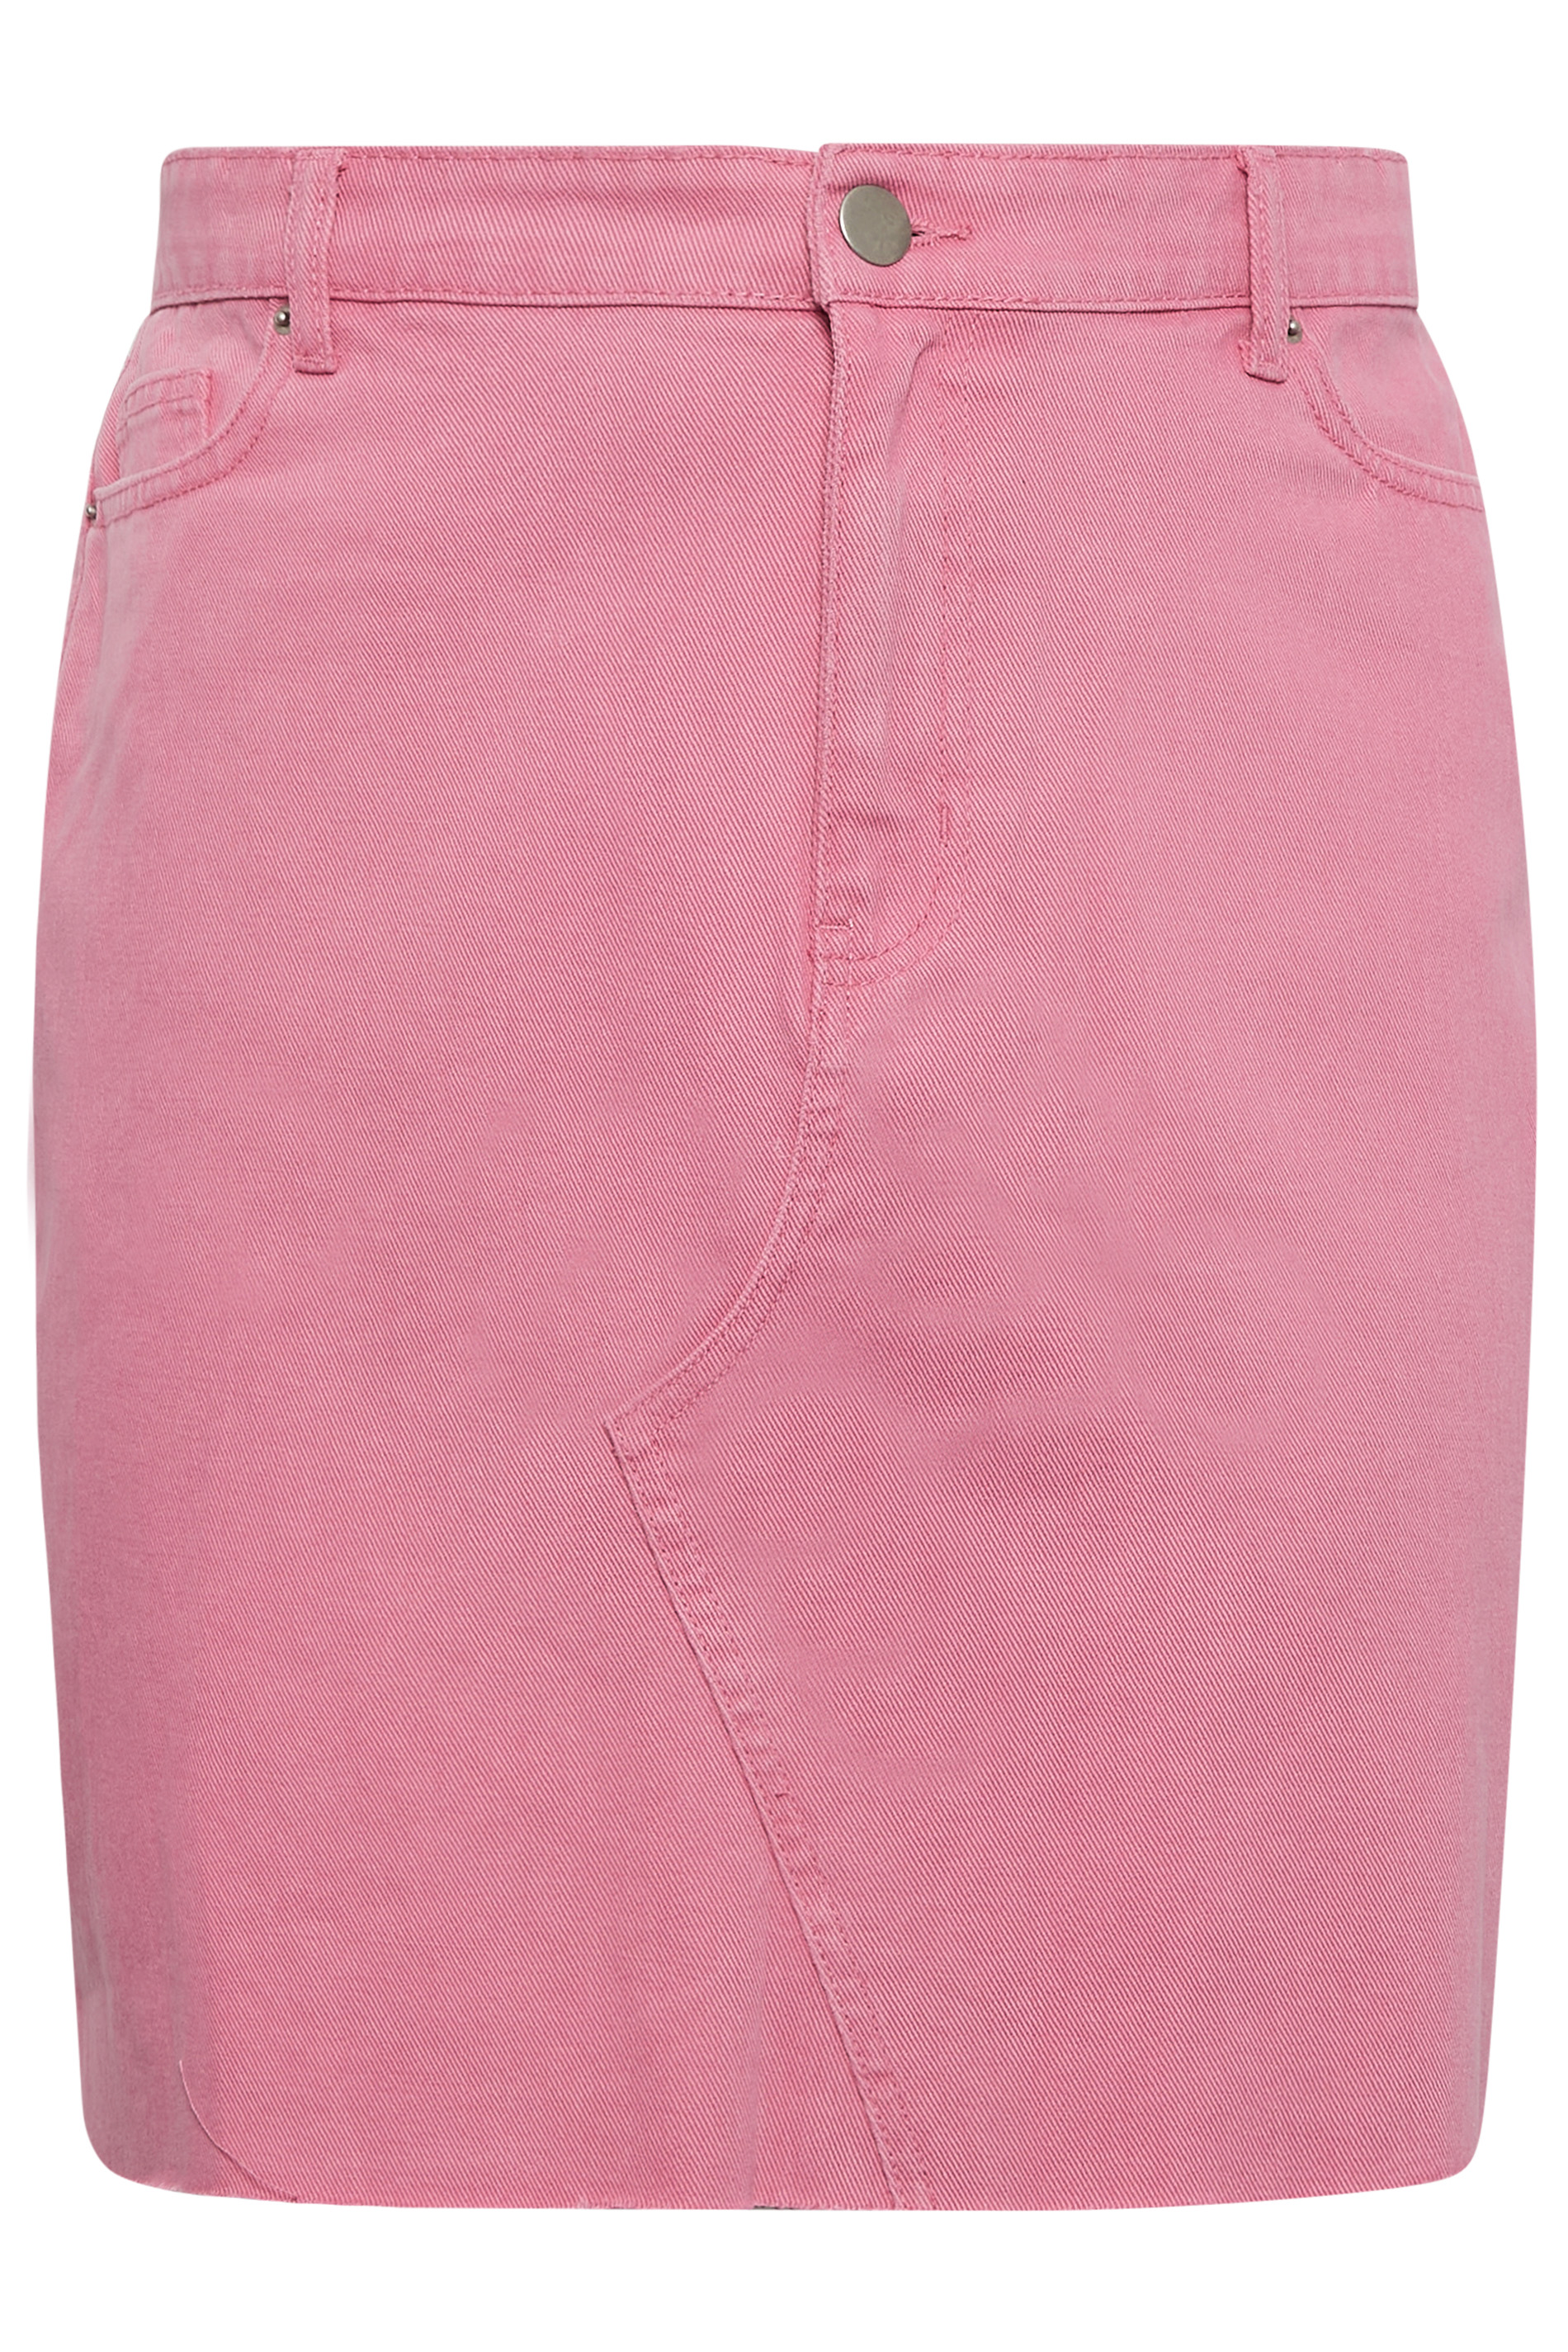 YOURS Plus Size Pink Denim Skirt | Yours Clothing